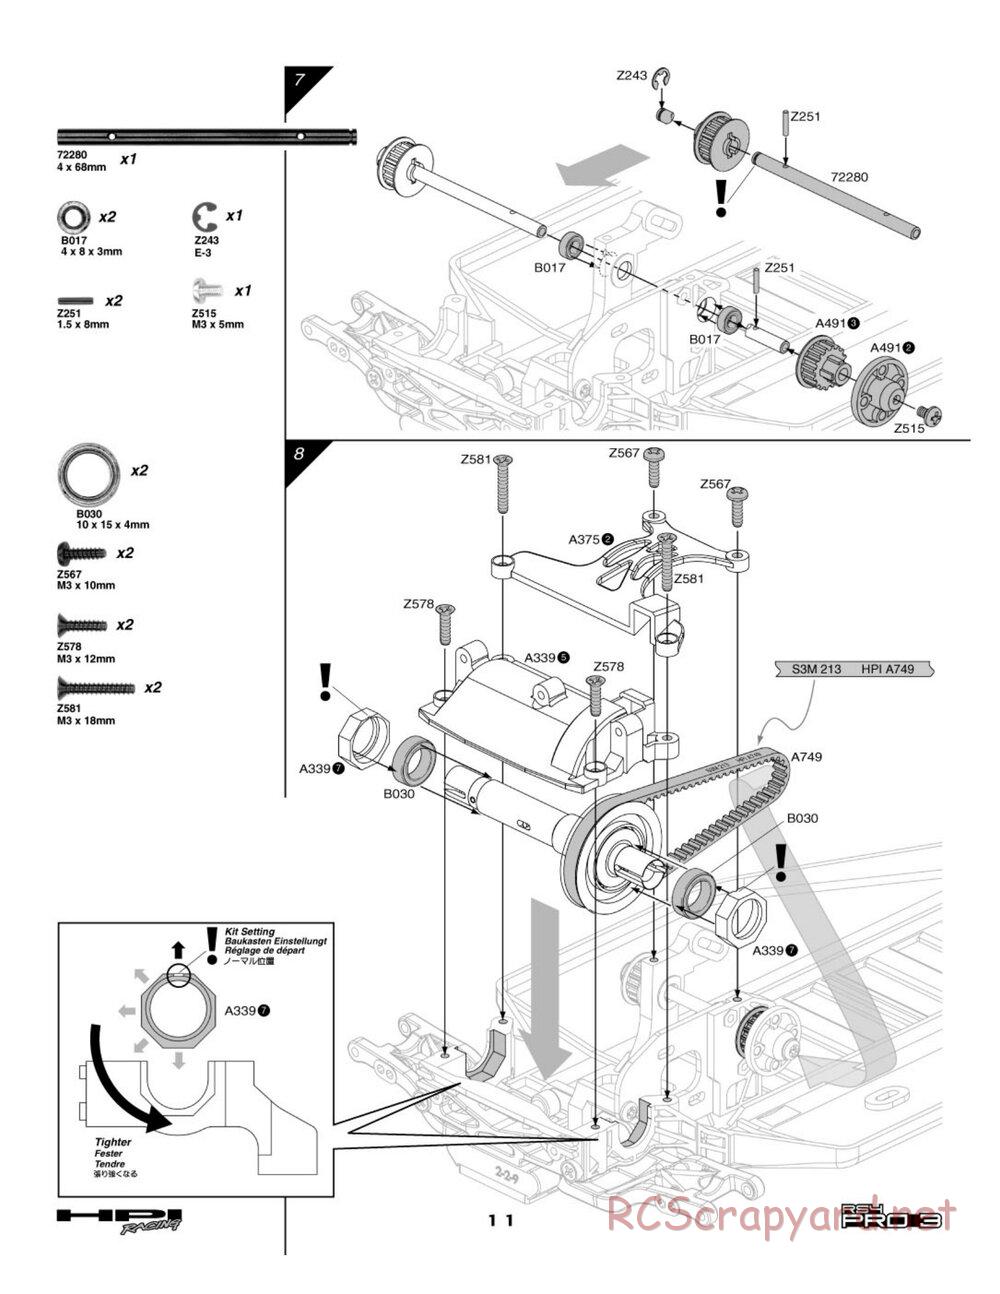 HPI - RS4 Pro 3 - Manual - Page 11